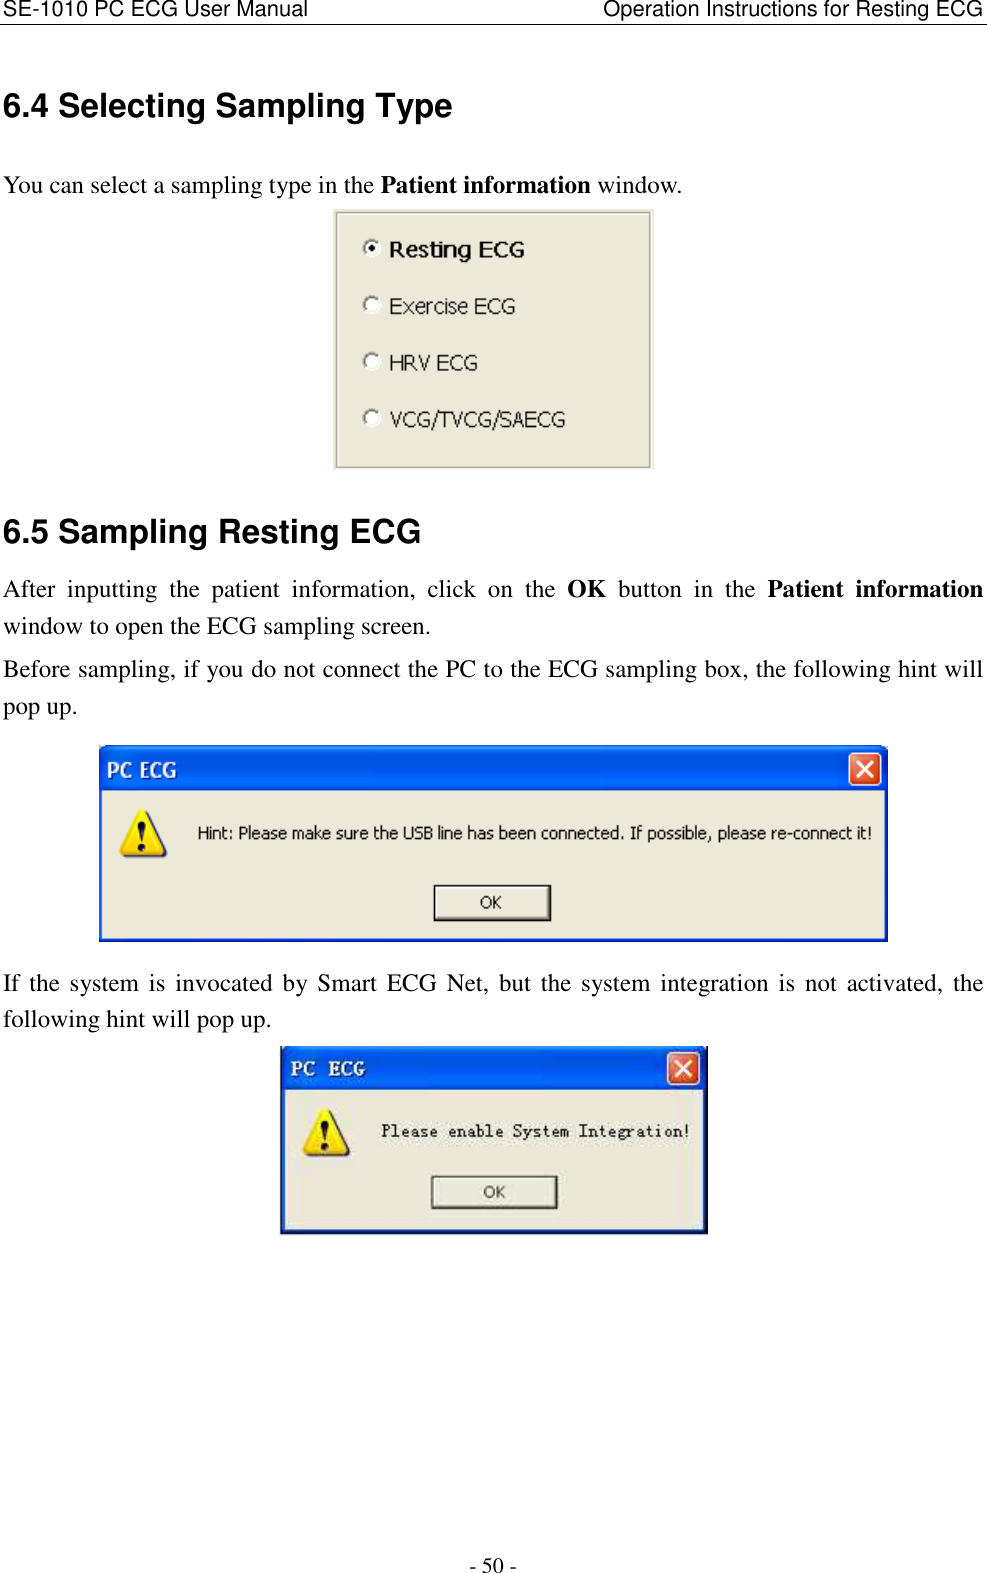 SE-1010 PC ECG User Manual                                                      Operation Instructions for Resting ECG - 50 - 6.4 Selecting Sampling Type You can select a sampling type in the Patient information window.  6.5 Sampling Resting ECG After  inputting  the  patient  information,  click  on the  OK  button  in  the  Patient  information window to open the ECG sampling screen. Before sampling, if you do not connect the PC to the ECG sampling box, the following hint will pop up.  If the system is invocated by Smart  ECG  Net,  but the system integration is not activated,  the following hint will pop up.  